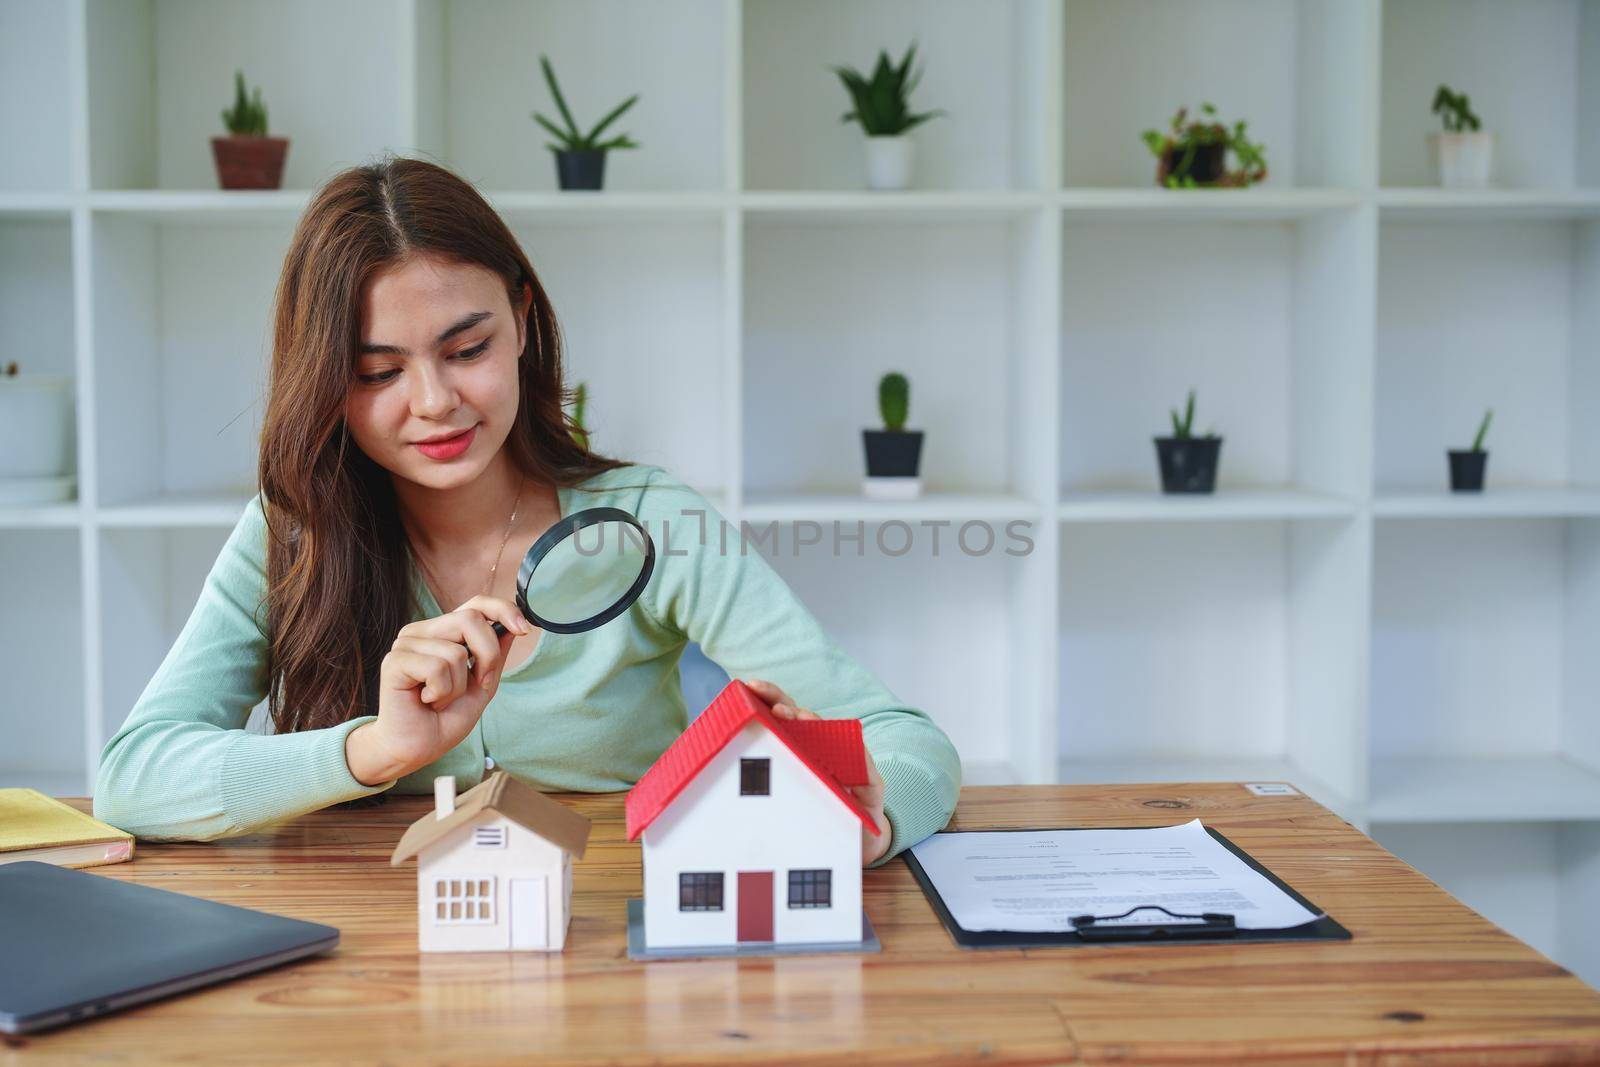 The client holds a magnifying glass to select a house model, inspect the concept of a home before making a decision to invest, make a loan, get insurance and sign important documents with the bank